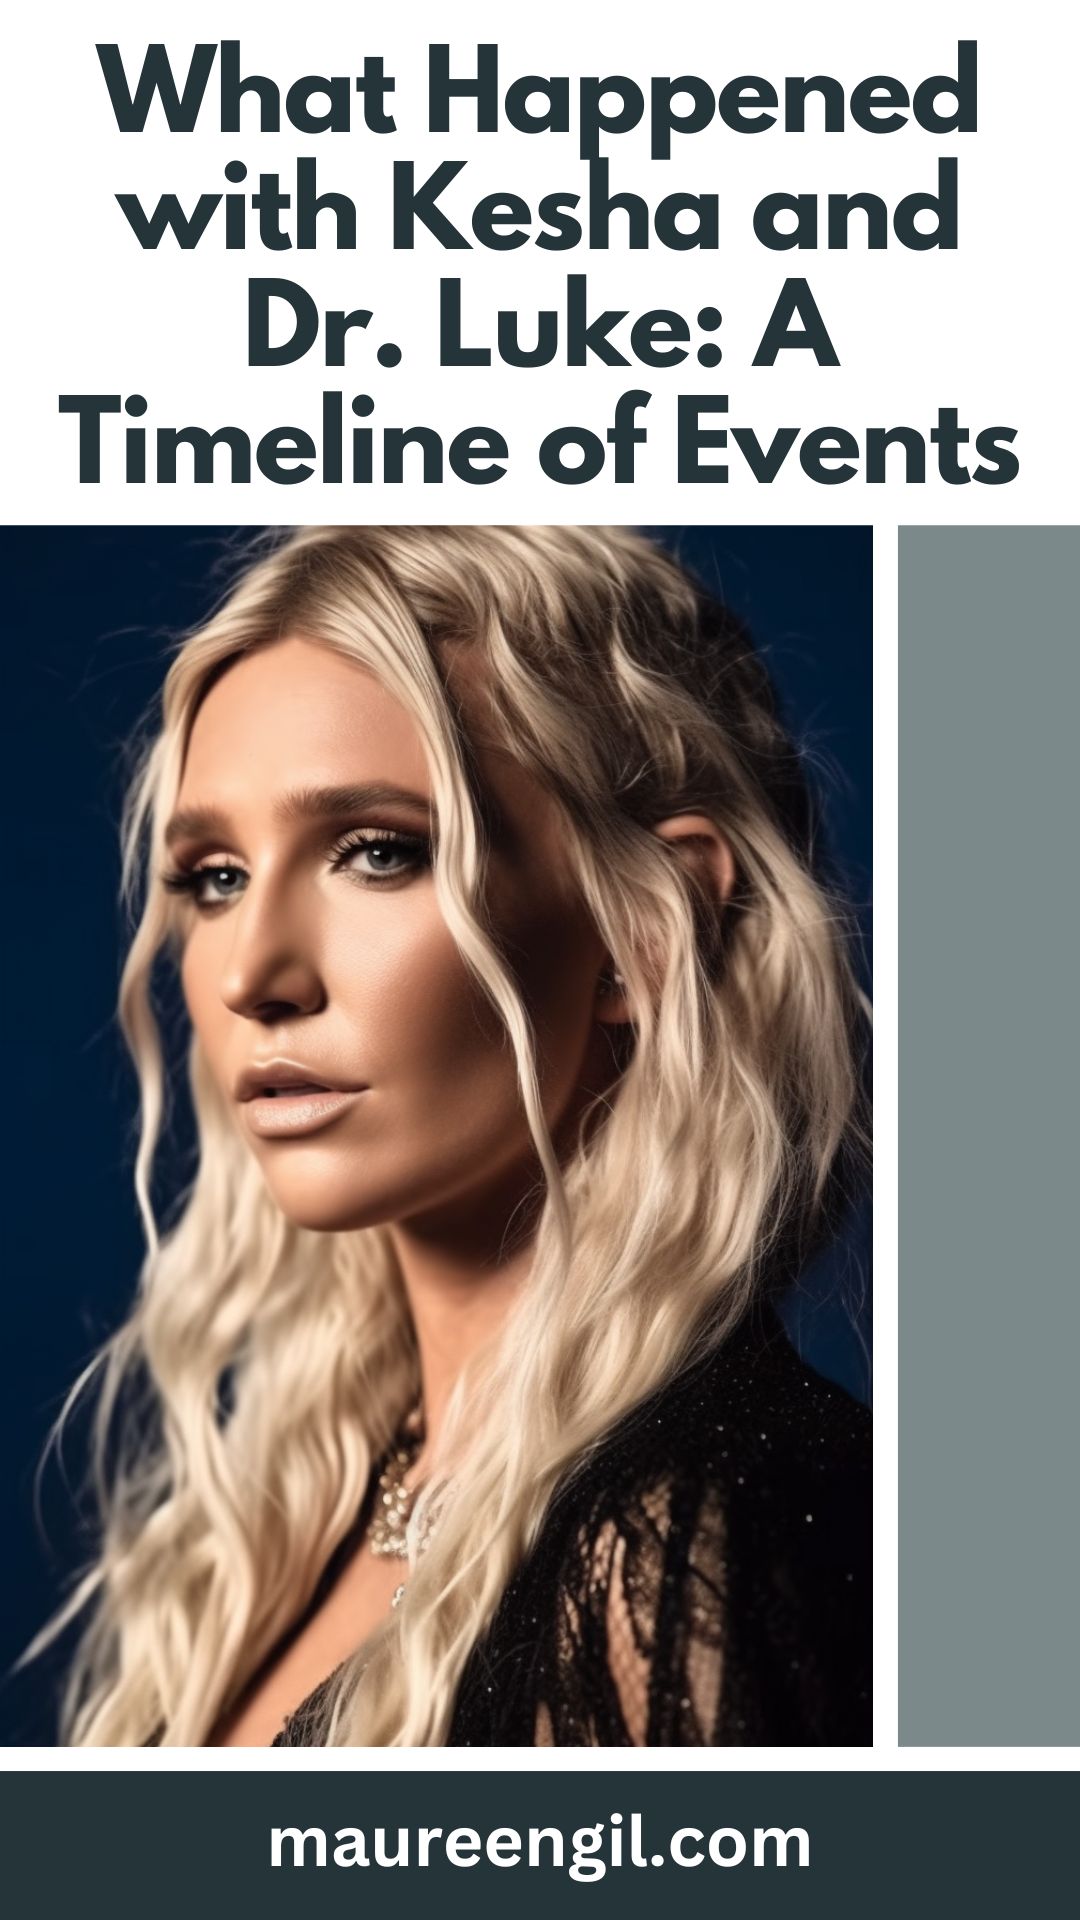 🌟 Kesha & Dr. Luke: A Decade-Long Legal Battle 🌟 From allegations of abuse to contract disputes, get a comprehensive timeline of events and understand the controversy of what happened with Kesha and Dr. Luke. #Kesha #DrLuke #LegalBattle #AlbumRelease #GagOrder #SexualAssault #SurvivorSupport #EmpowermentJourney #CelebNews #EntertainmentIndustry #BreakingSilence #BelieveSurvivors #CourtofLaw #CelebGossip #MusicWorld #SpeakUp #EndViolence